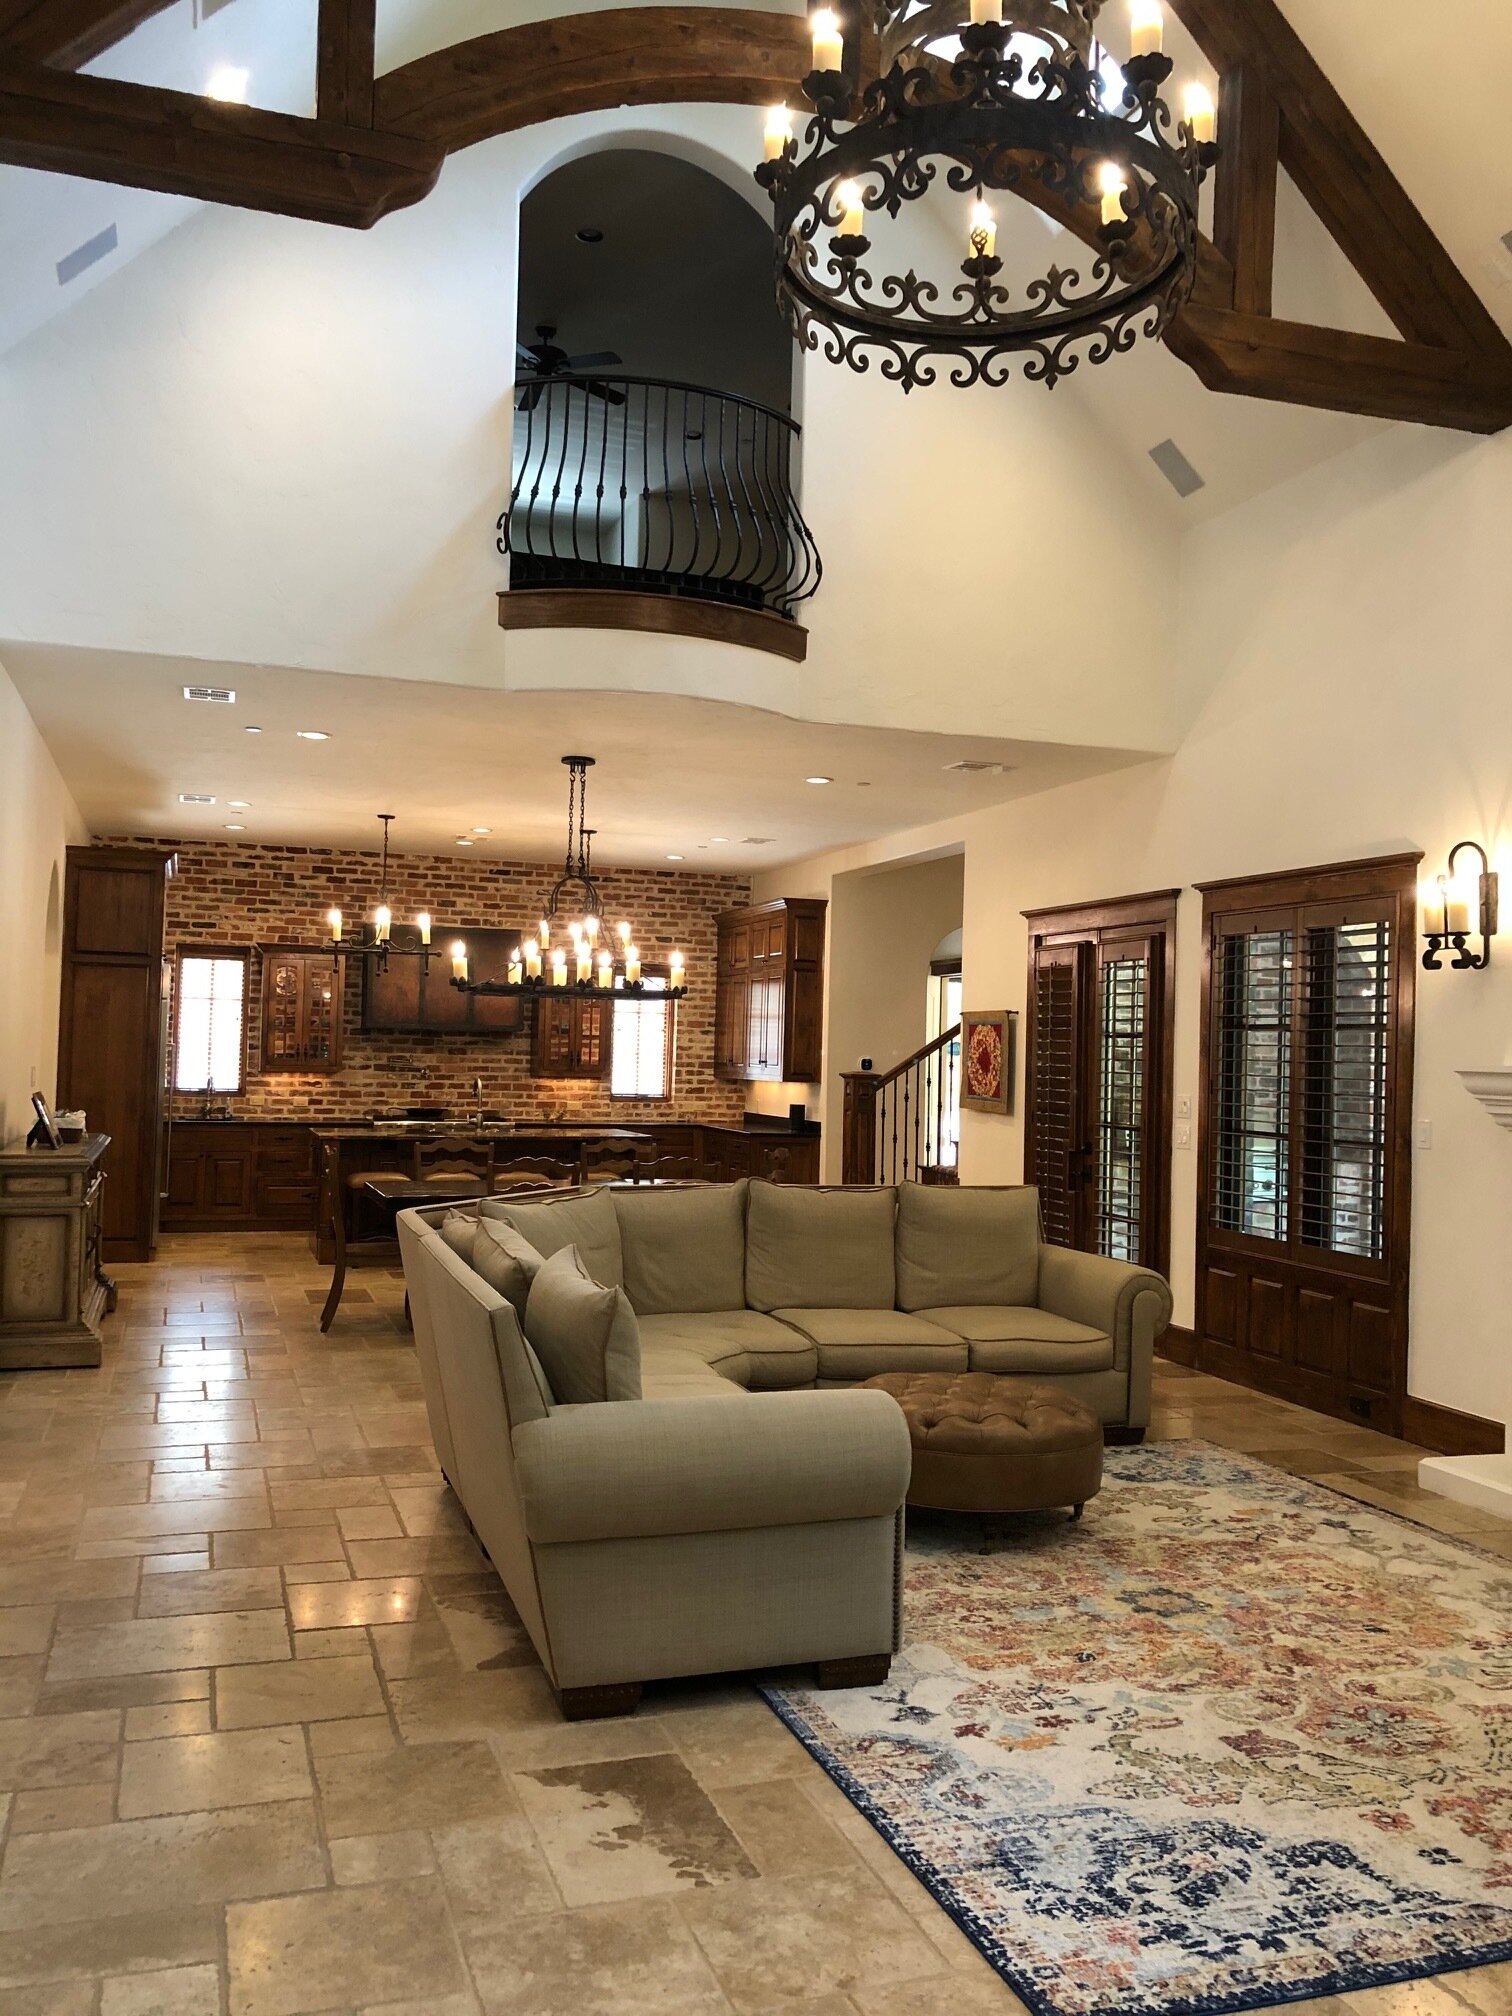 How To Update A Tuscan Style Home For, Tuscan Style Floor Tile